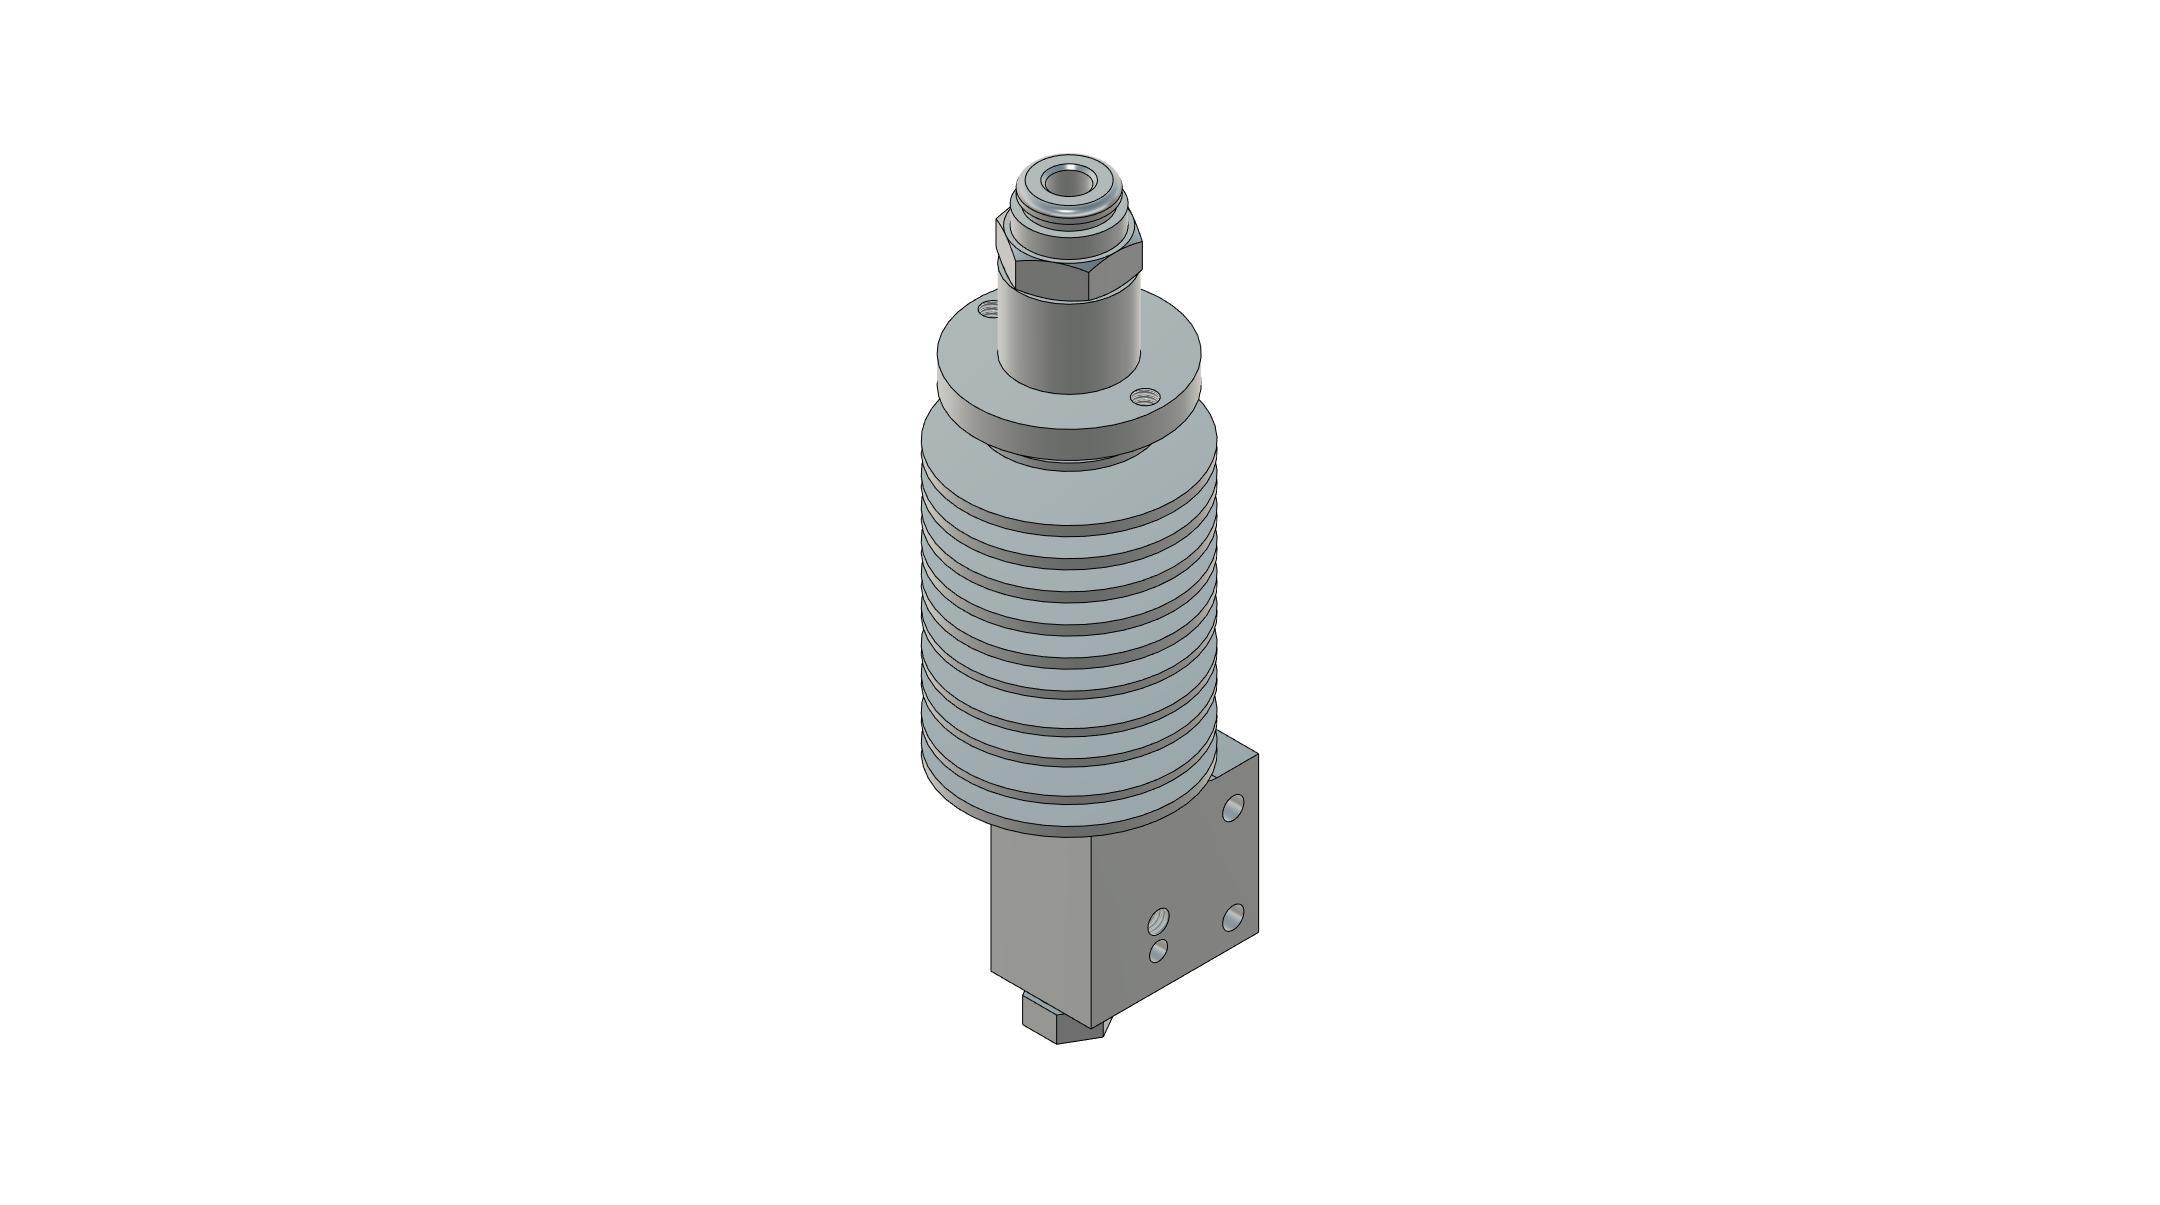 Anycubic Kobra Max Hot end .step 3d model